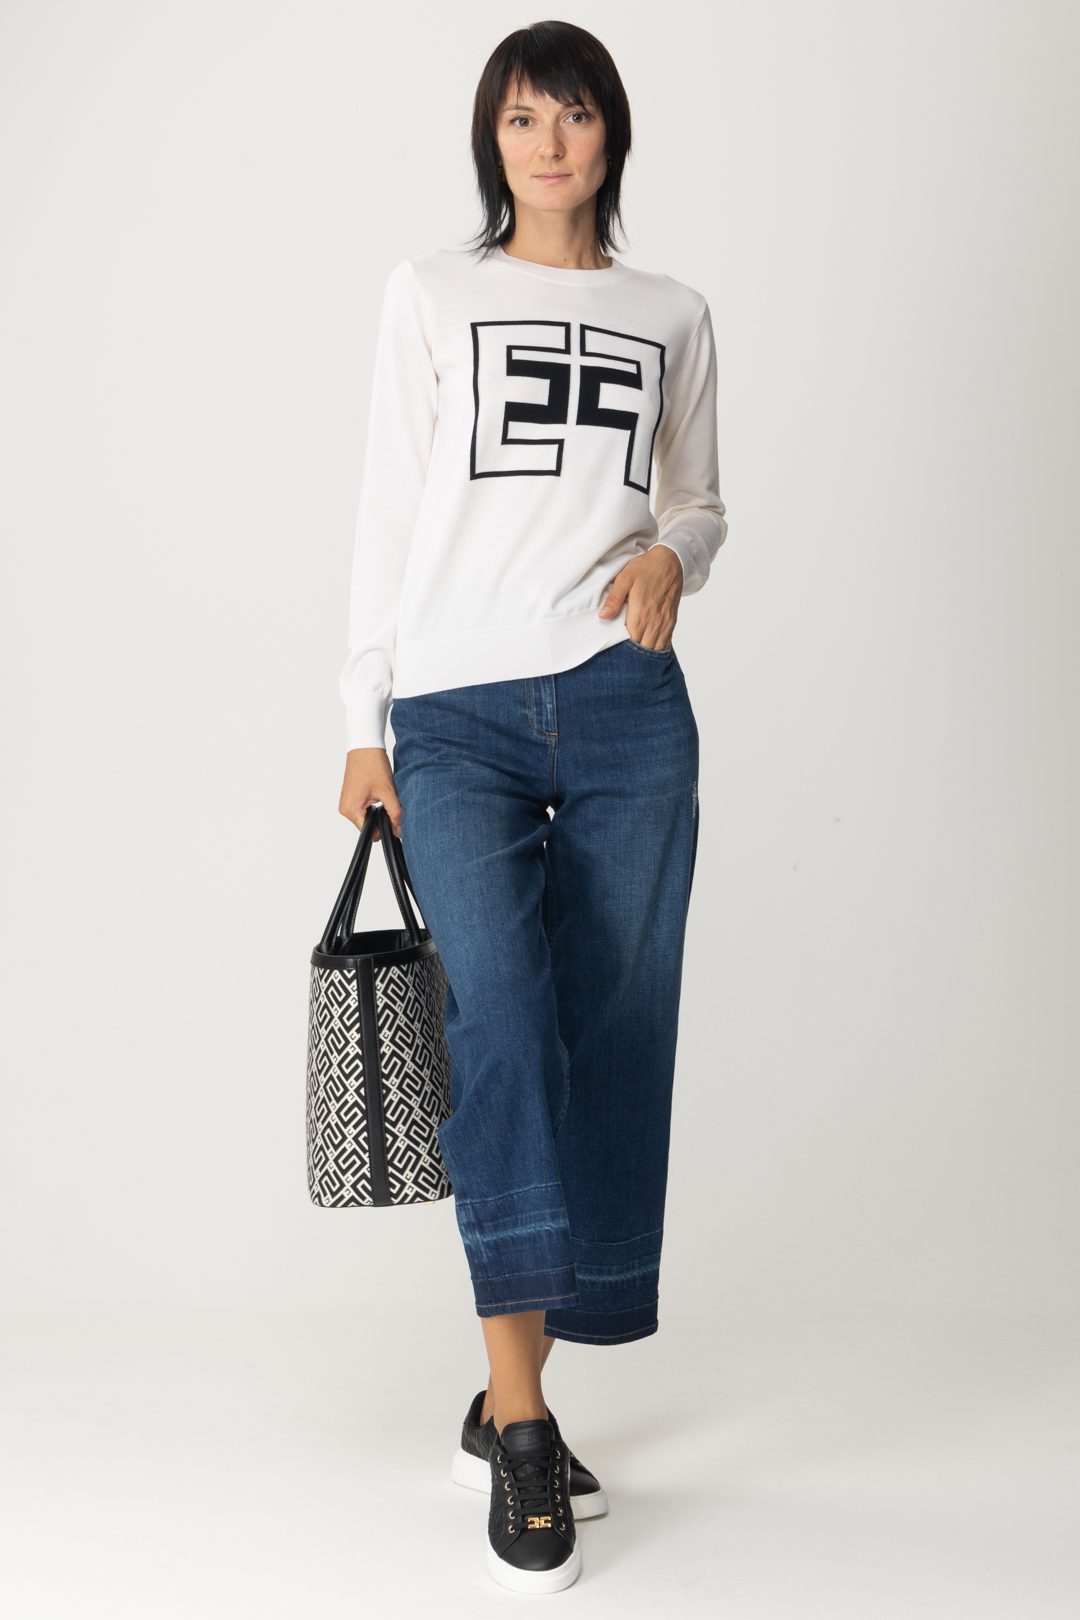 Preview: Elisabetta Franchi Knit pullover with contrasting logo Burro/Nero